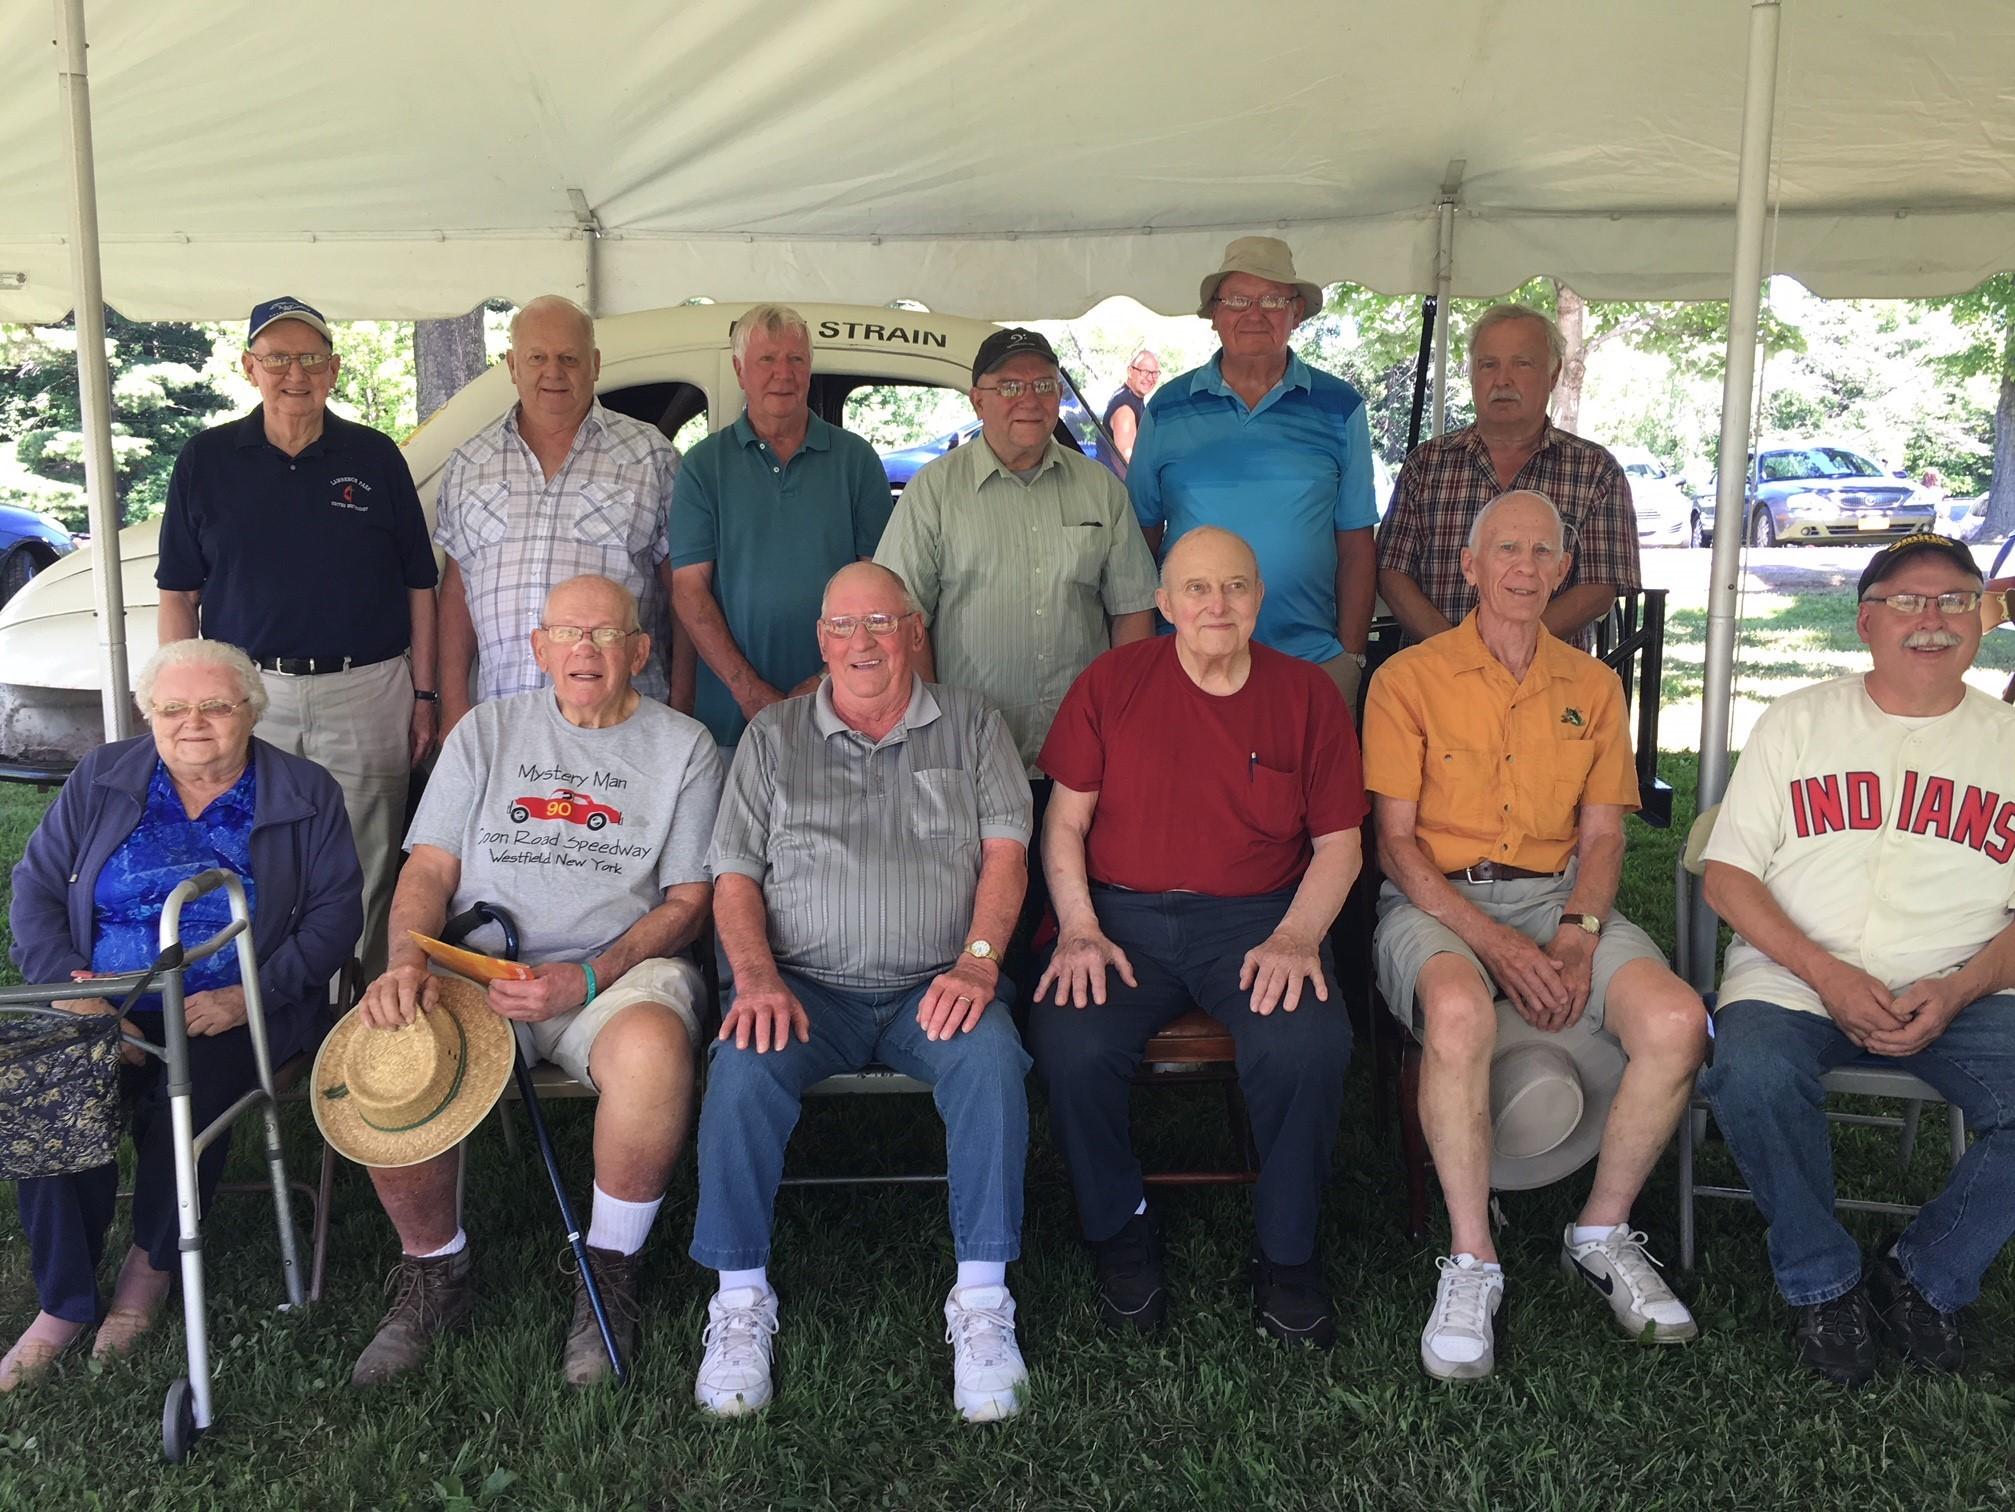 Group photo taken 7-8-18 at Ottaway Park: Back row left to right: Dave Turner (driver), Ron Blackmer (driver), Wally Howser (son of driver Jim Howser), John Swartout (son of original builder and owner of Coon Road Speedway, Joel Swartout), Skip Furlow (driver), Bill Catania (builder of #18 replica race car). Front row left to right: Emma Strain (widow of driver Don Strain), Ken See (driver), Al Brumagin (driver), Russ Weise (driver), Ray Sonnenberg (driver), Sean Hardy (current property owner of the site of